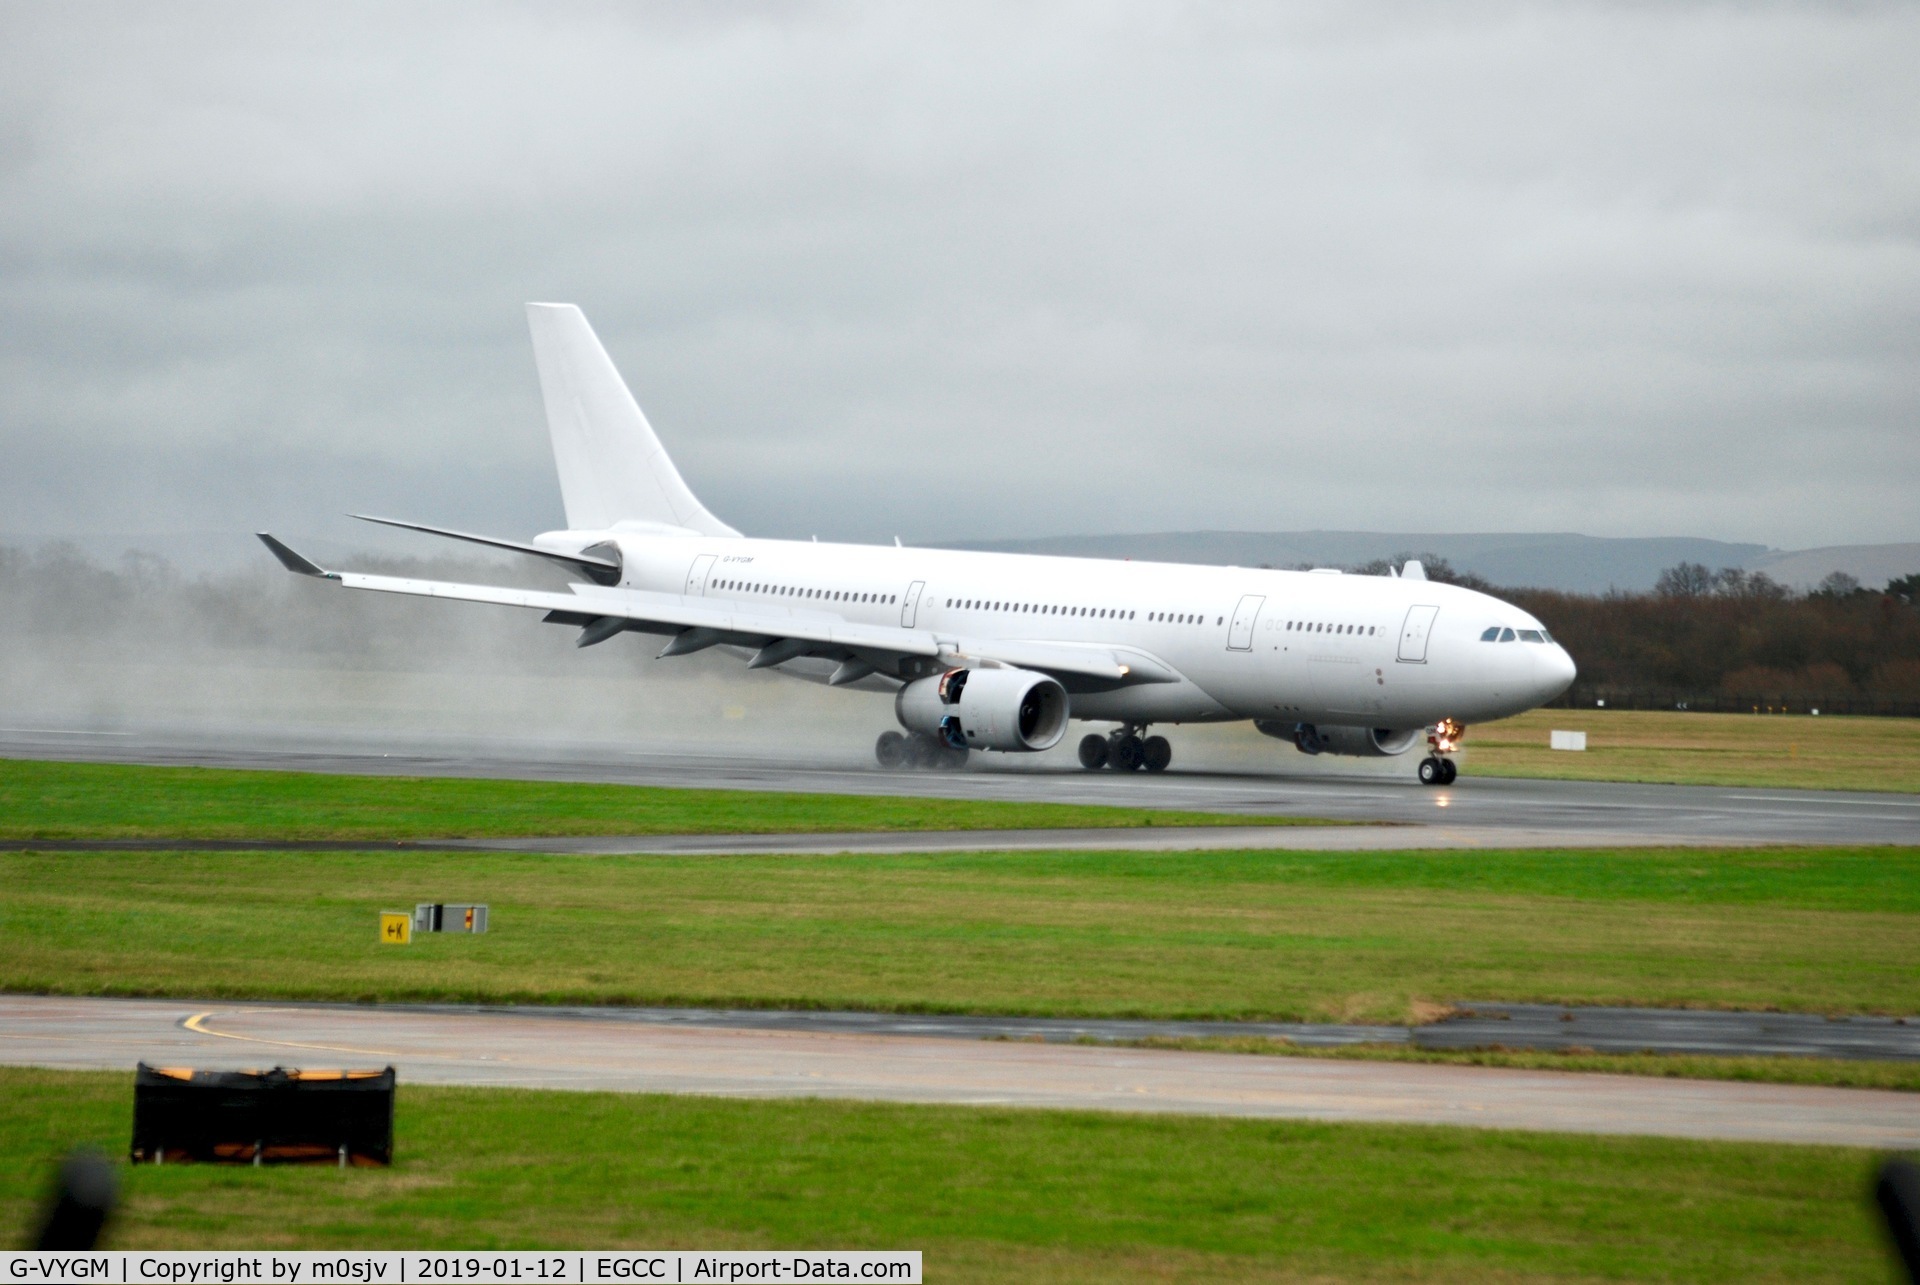 G-VYGM, 2015 Airbus A330-243 C/N 1601, Taken From RVP on a Cold and Damp Saturday